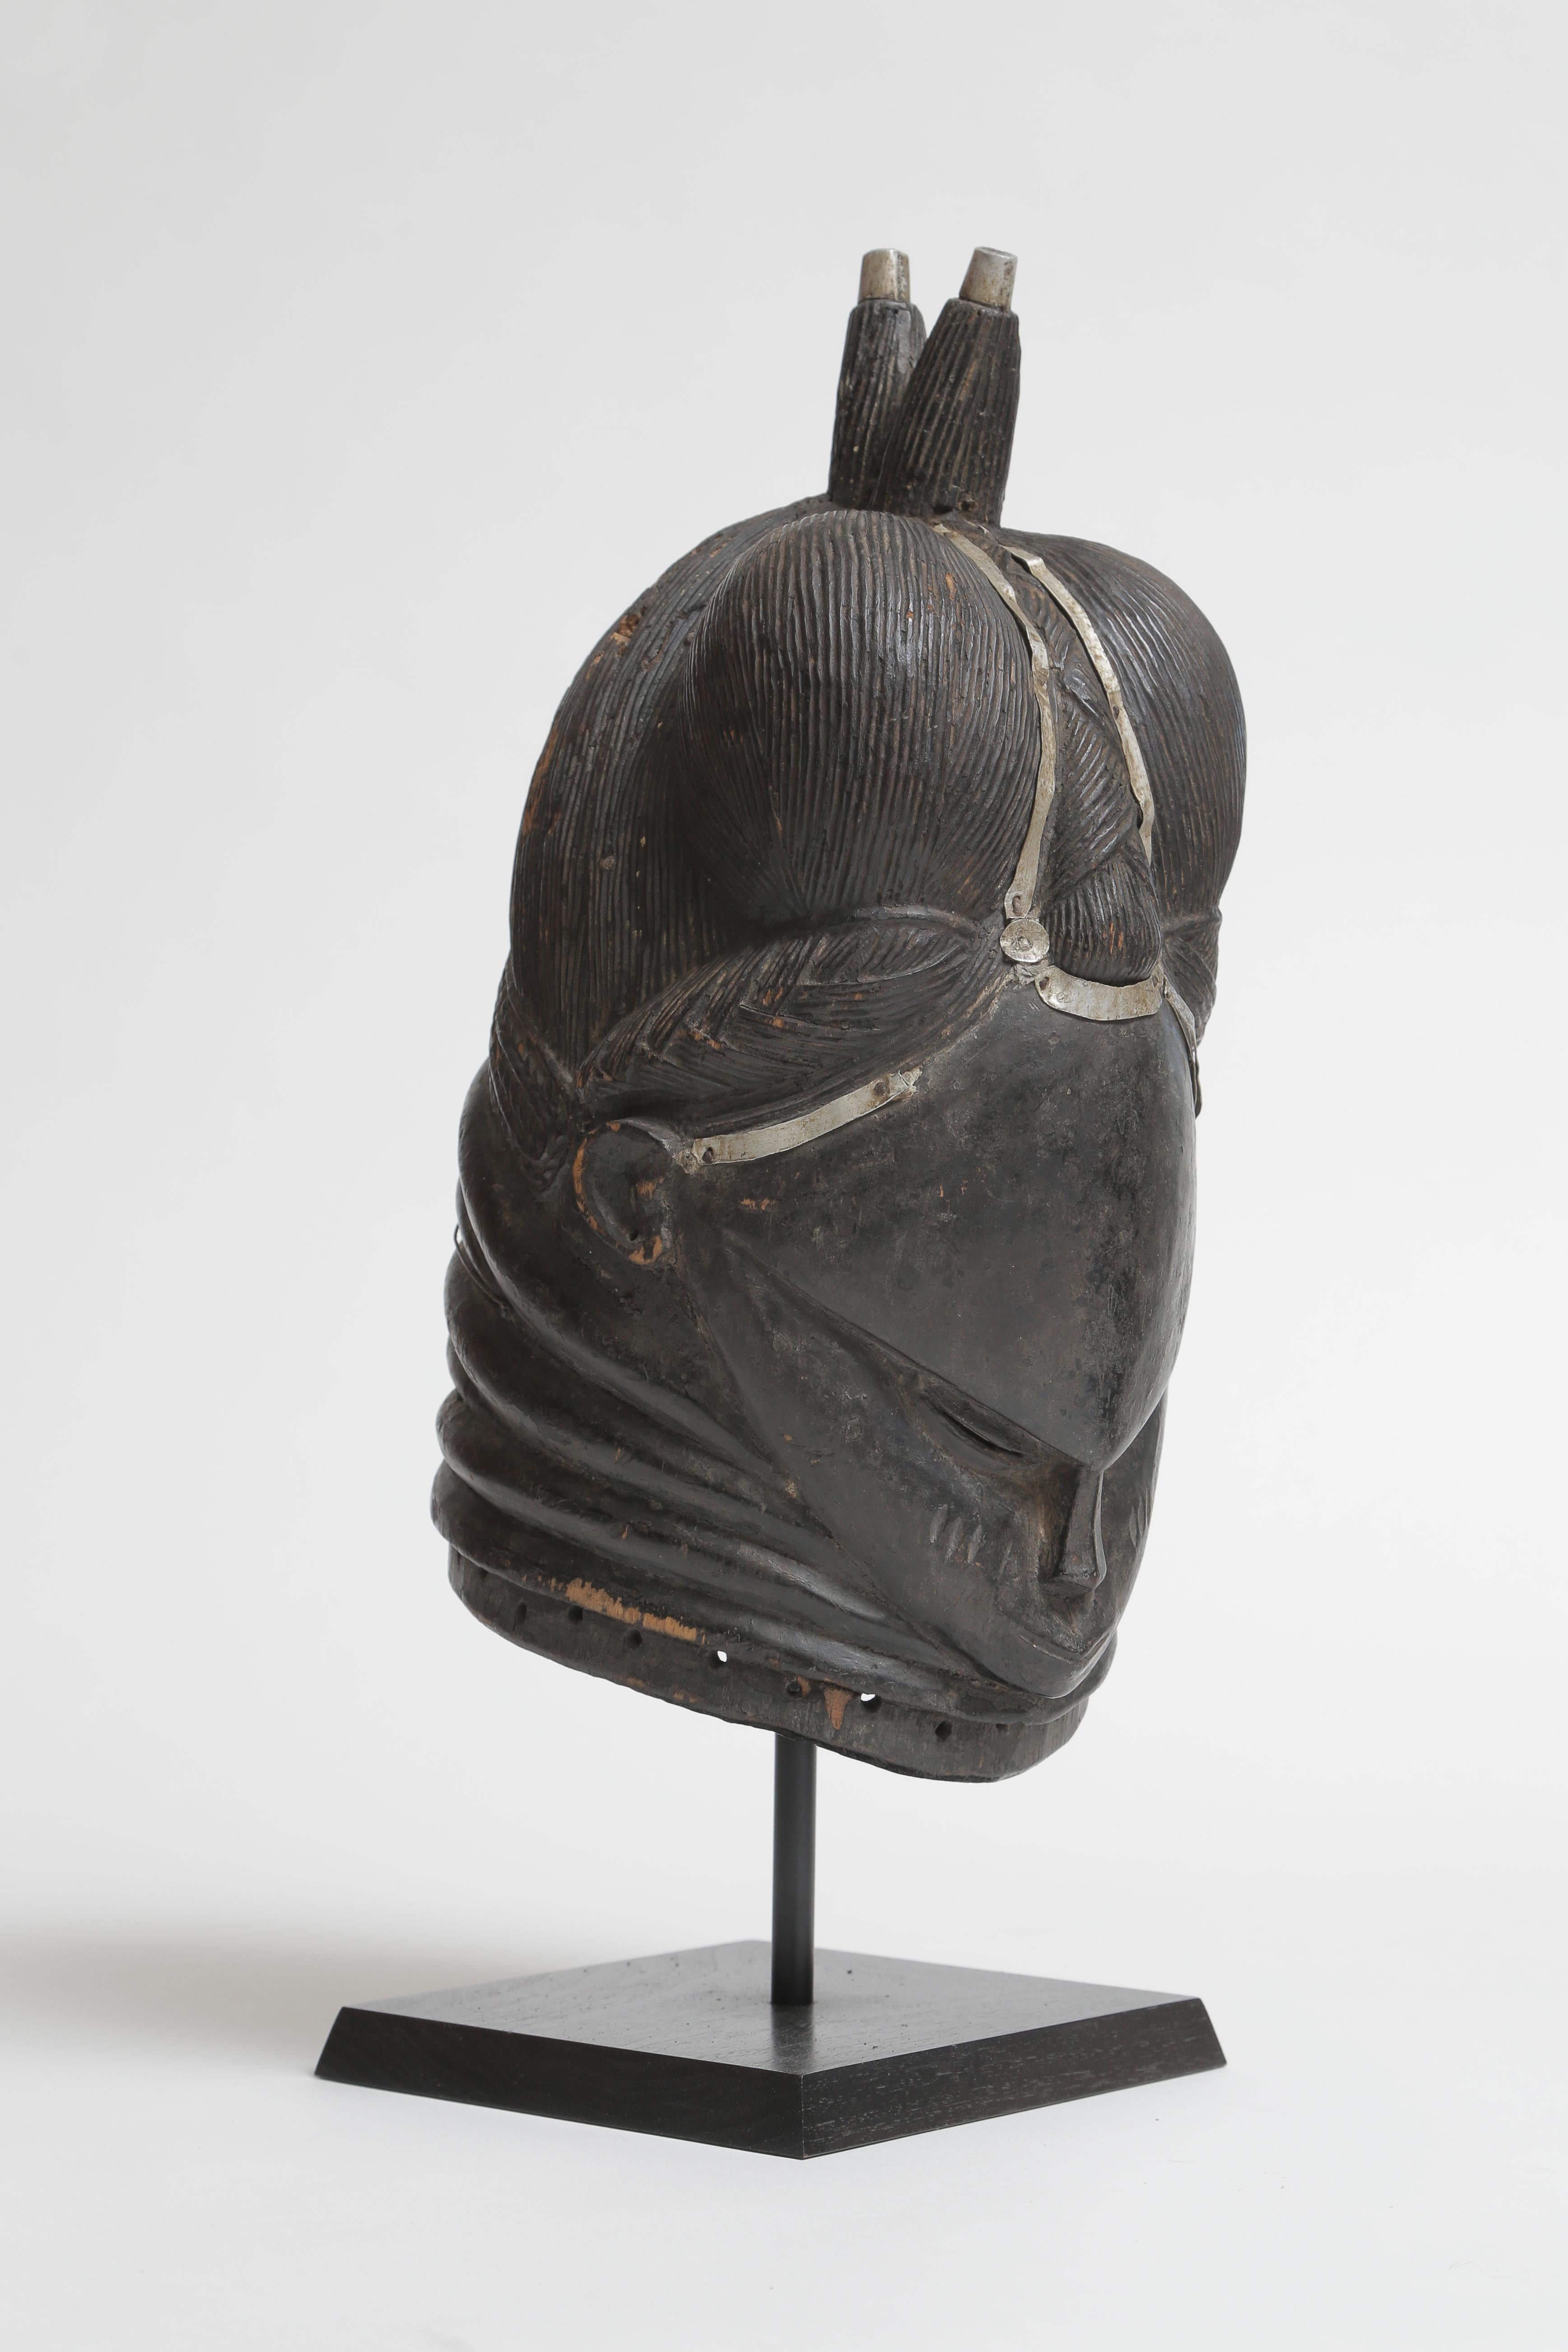 An early 20th century example.
The masks of the Sande society were used exclusively in masquerade performances by the women of the tribe.
The Mende tribe is located in Sierra Leone.